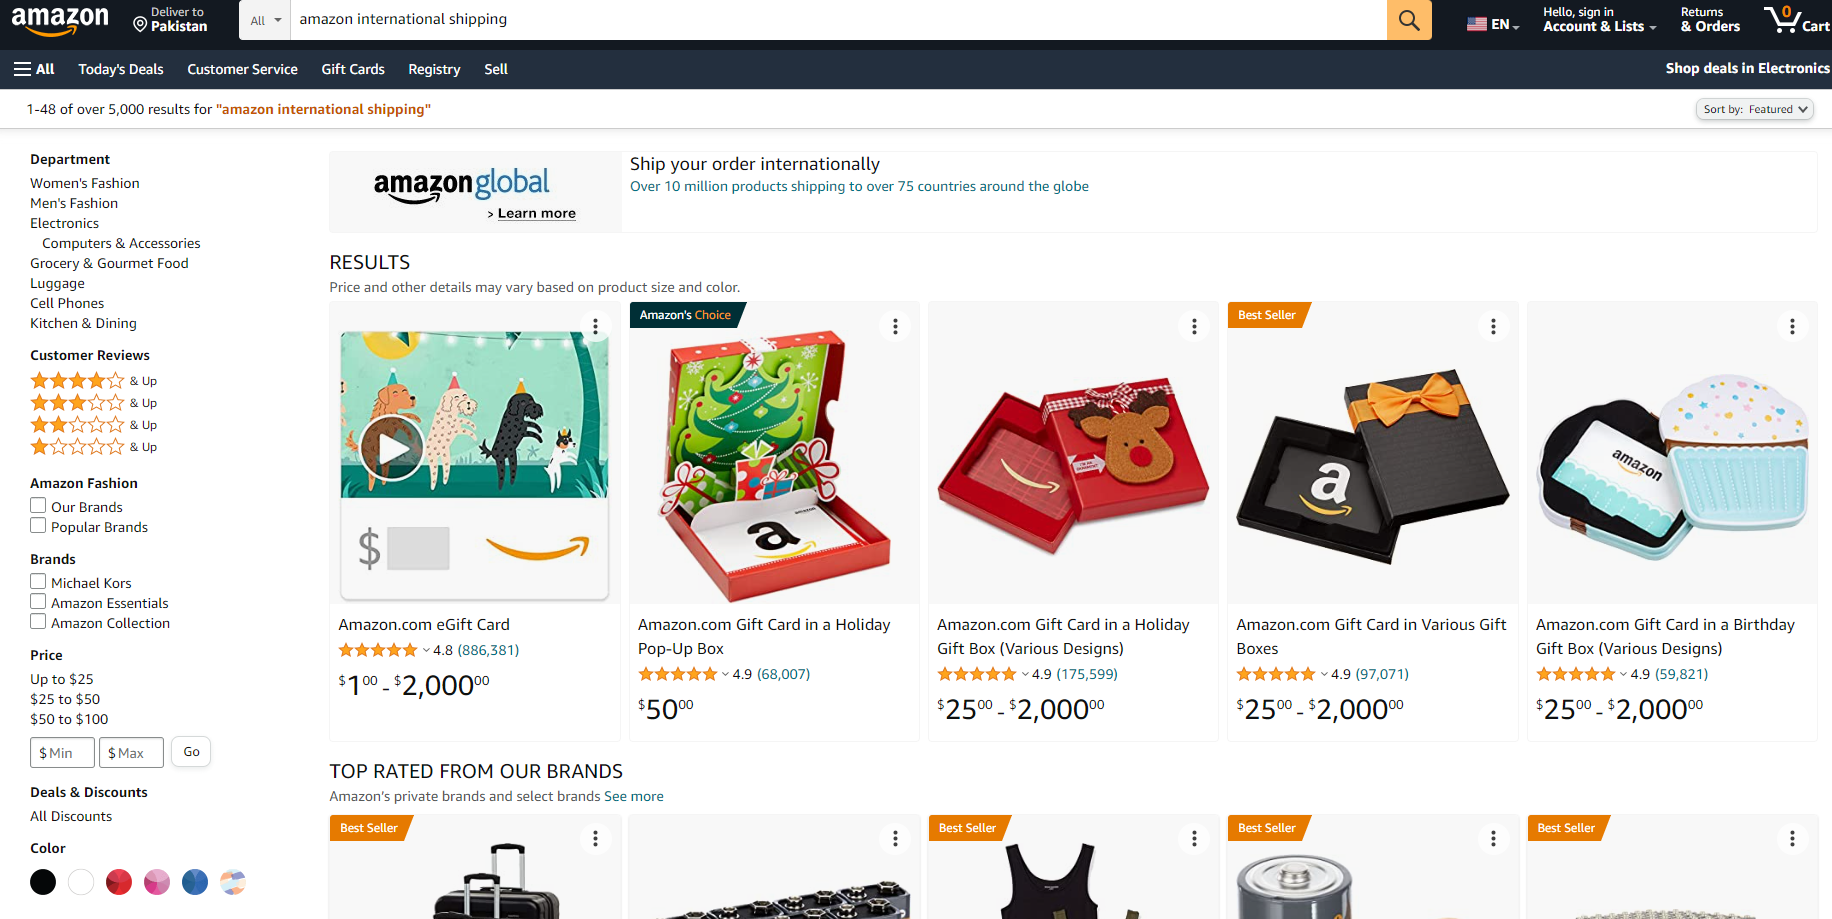 Amazon Shipping Guide: How to Configure Shipping Templates and Settings on Amazon